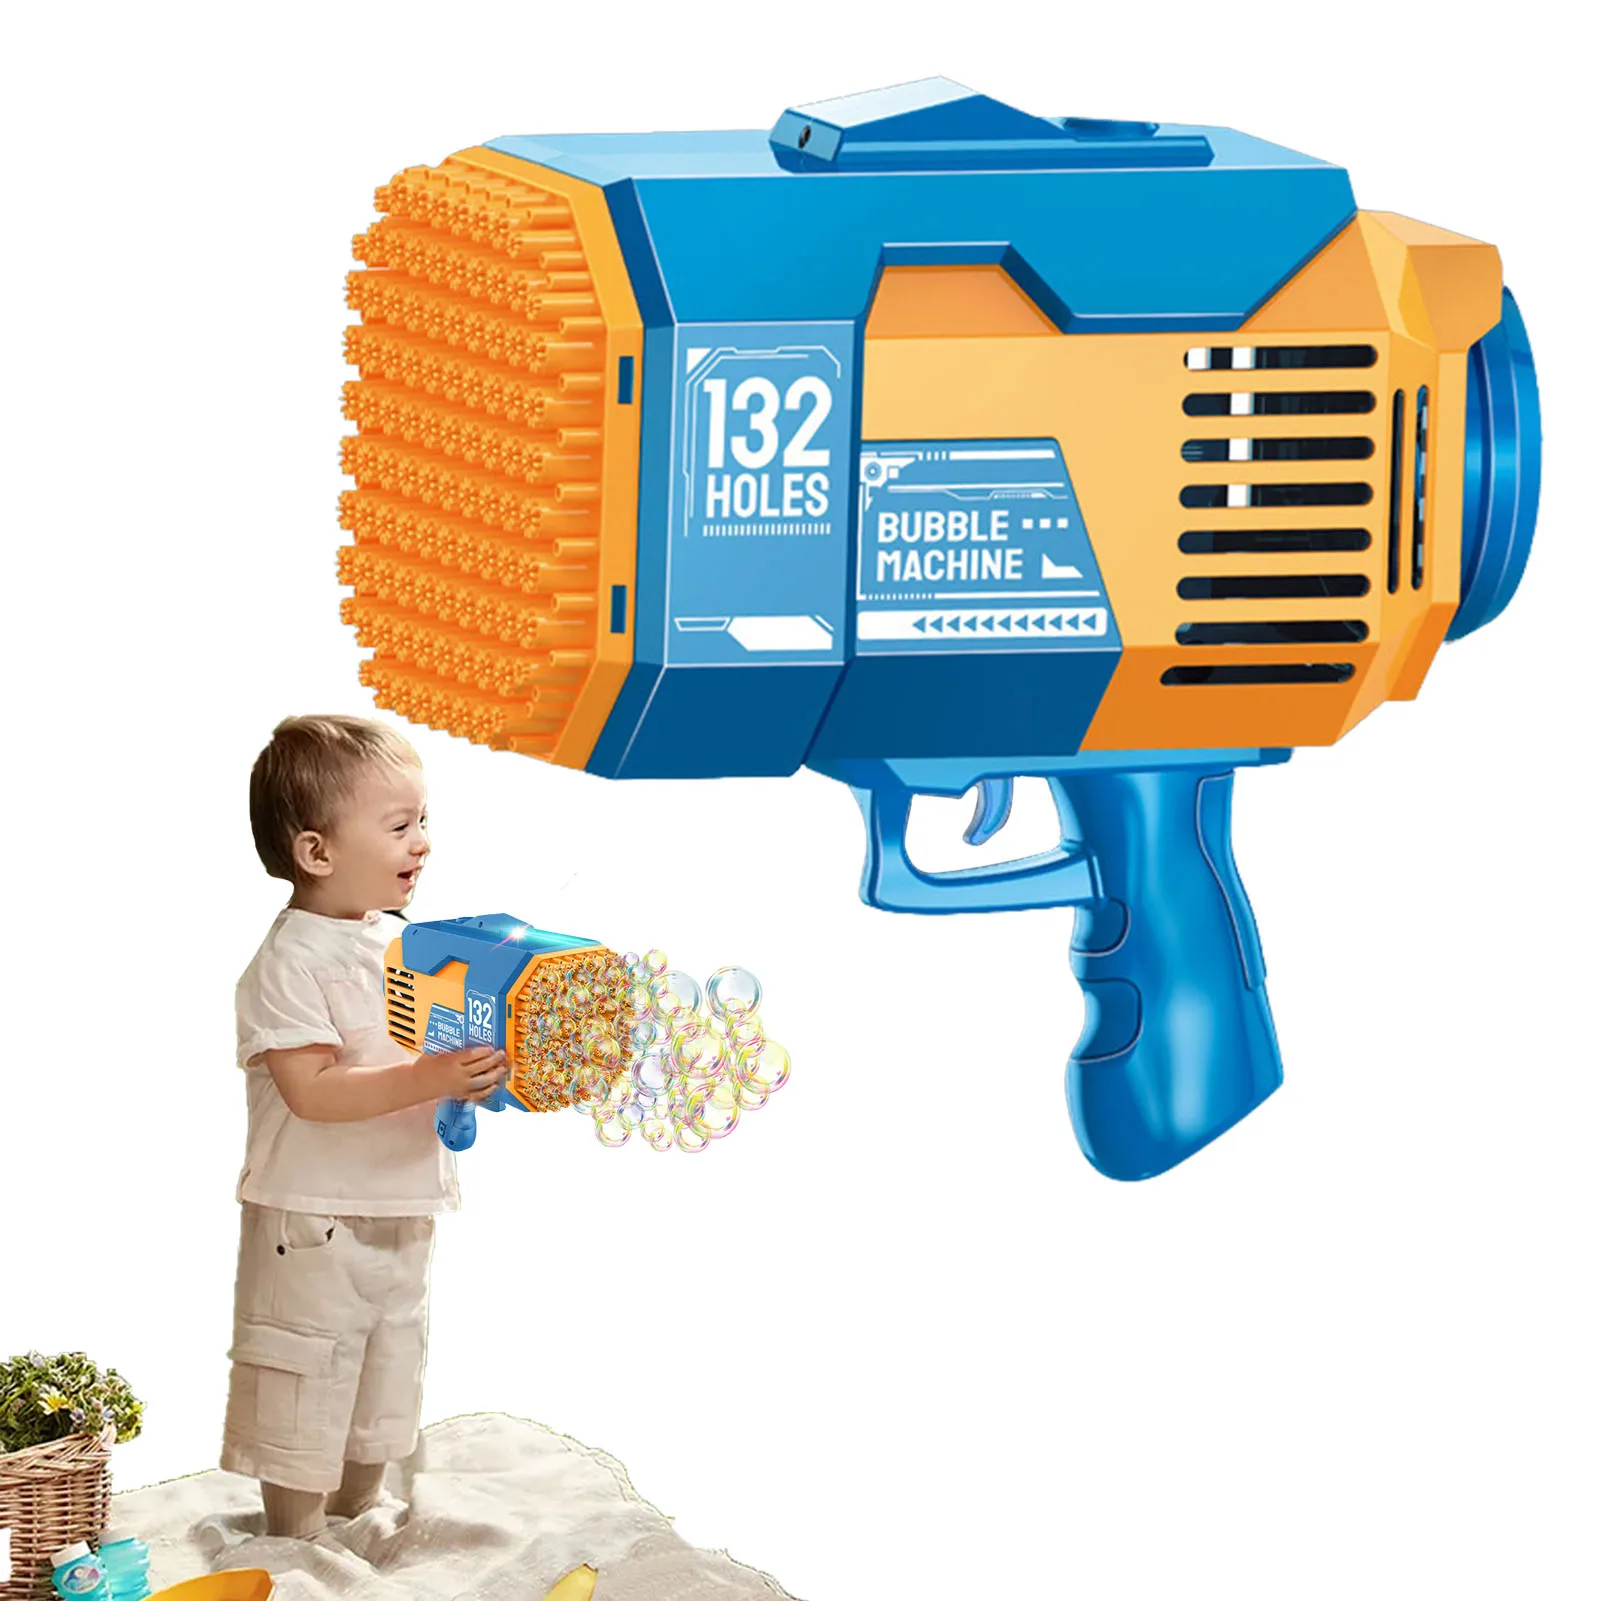 

Rocket Boom Bubble Blower 132 Hole Rocket Launcher Bubble Maker With Lights Automatic Bubble Maker Machine Summer Indoor Outdoor